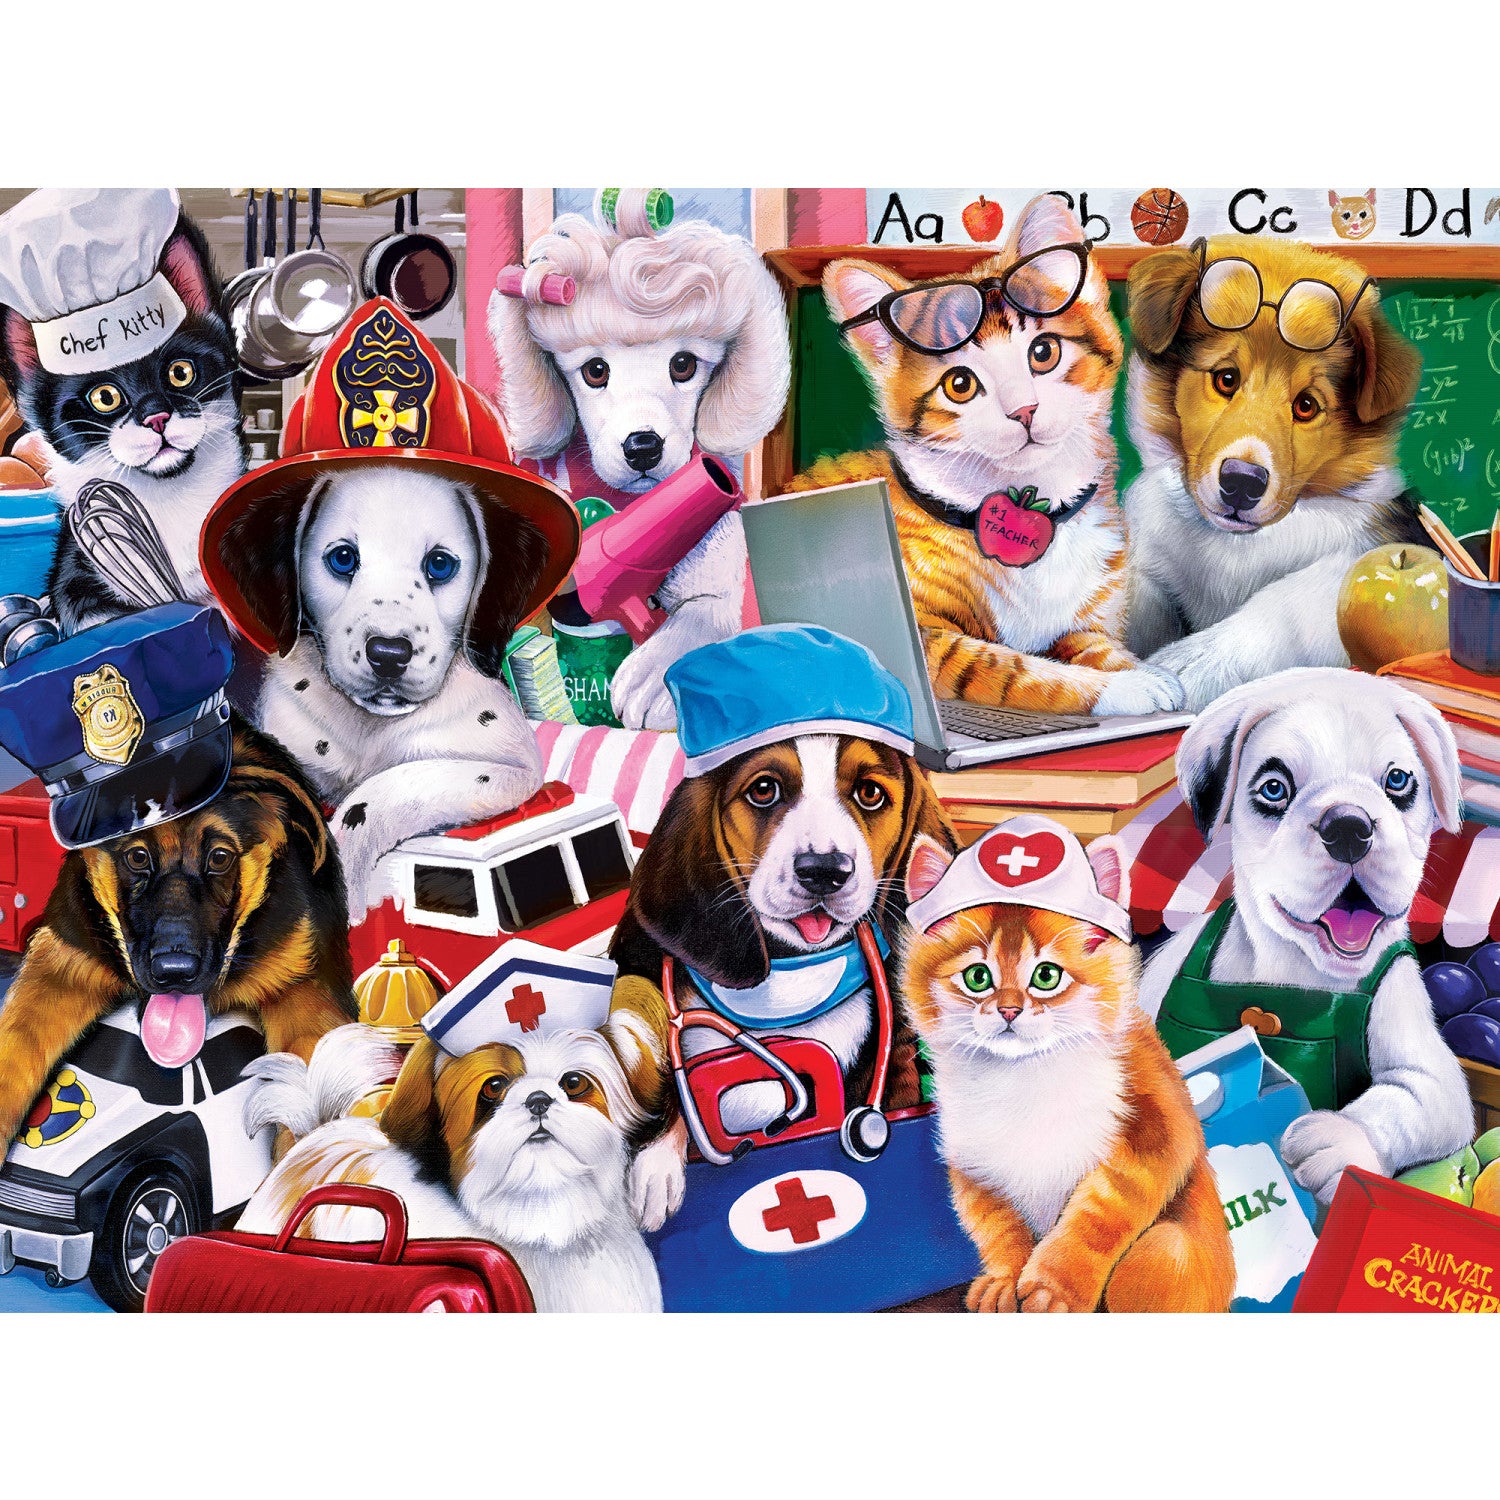 Playful Paws - Essential Workers 300 Piece Puzzle